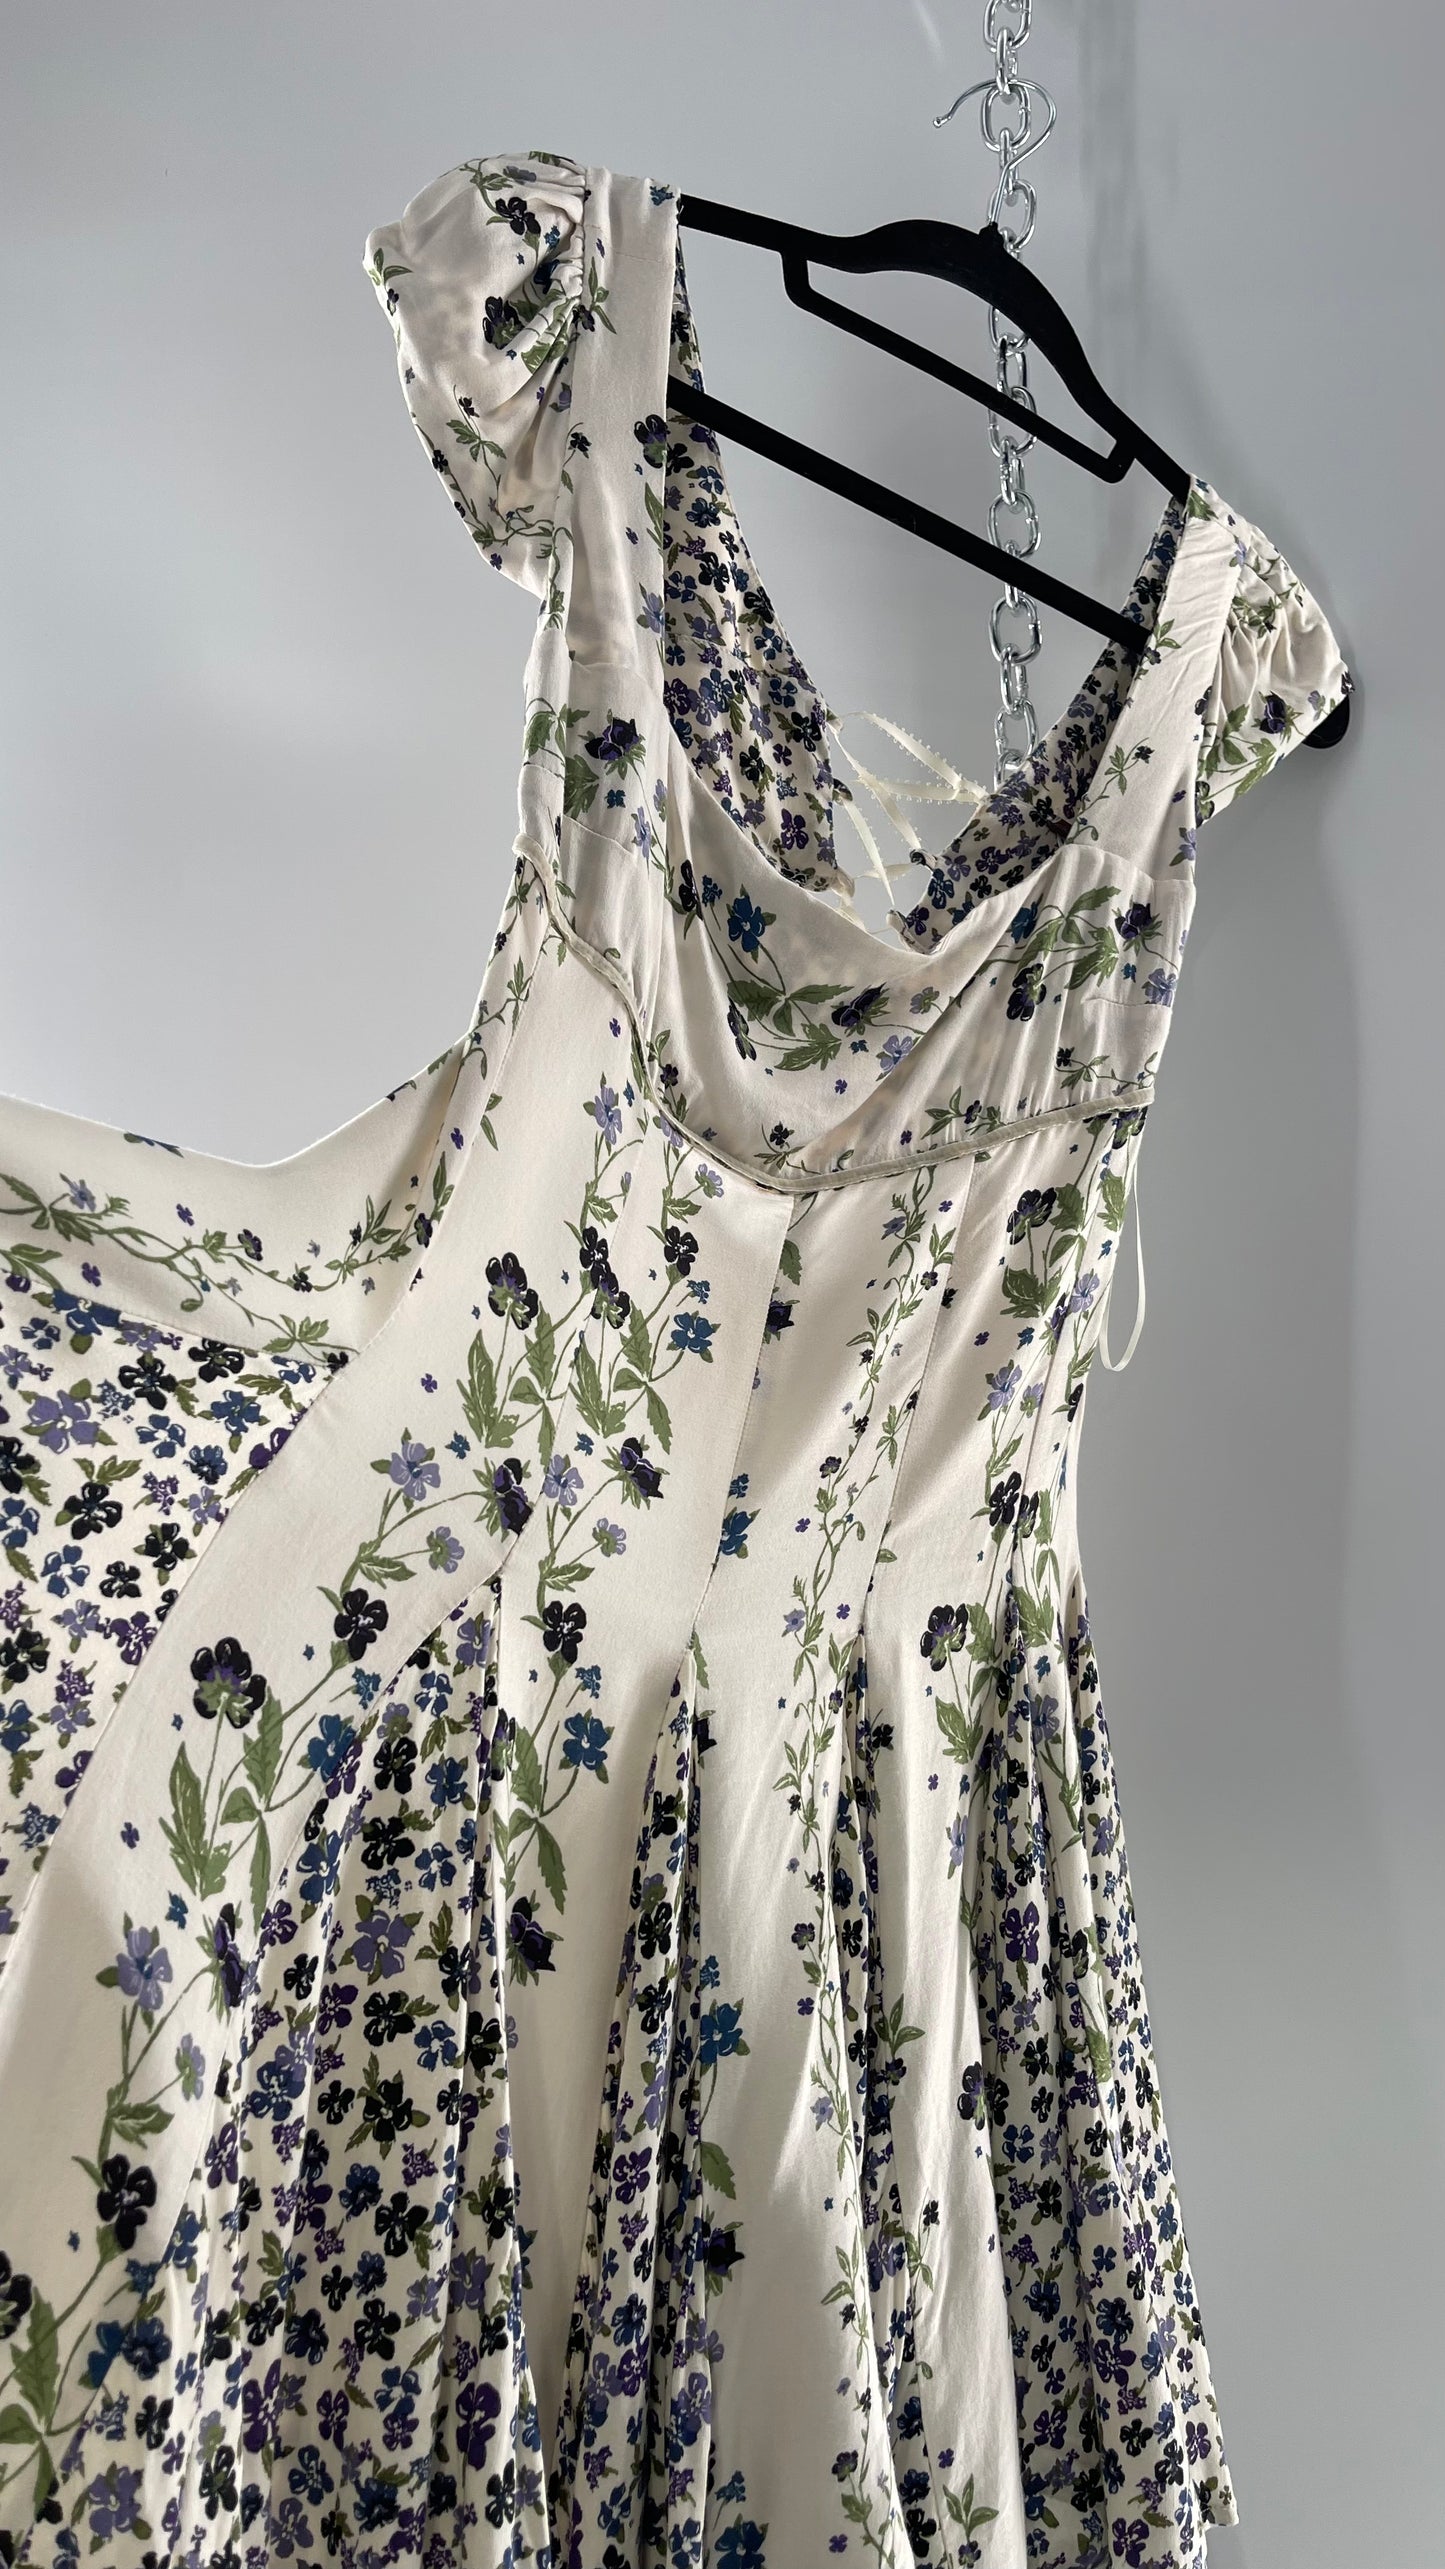 Free People Ivory Mini Dress with Violet Floral Pattern, Cap Sleeves and Lace Up Open Back (M)